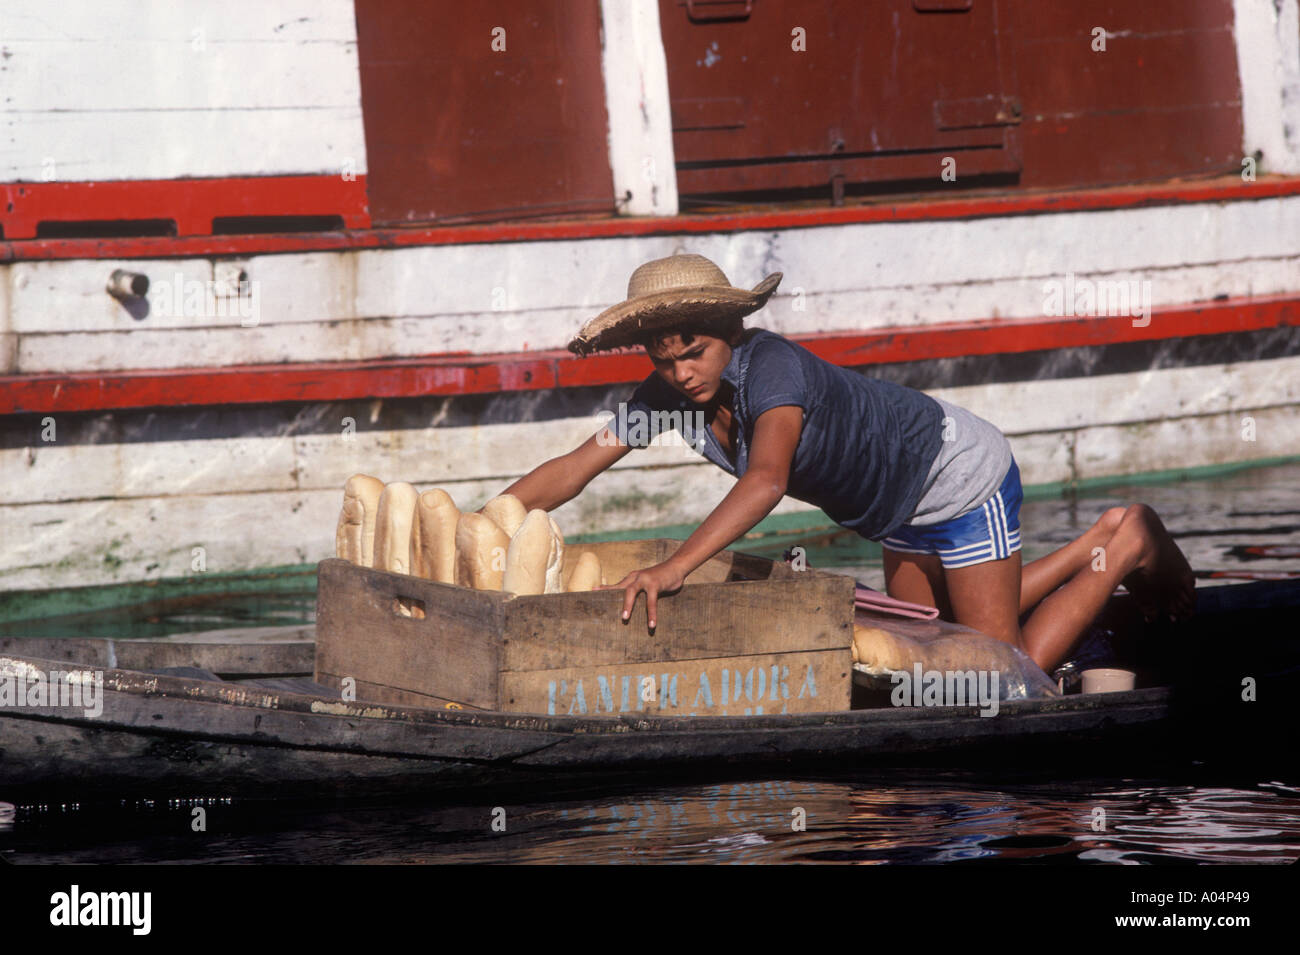 Manaus the river Amazon Brazil South America Teenage boy sells bread from a small boat to houseboats 1980S 1985 HOMER SYKES Stock Photo